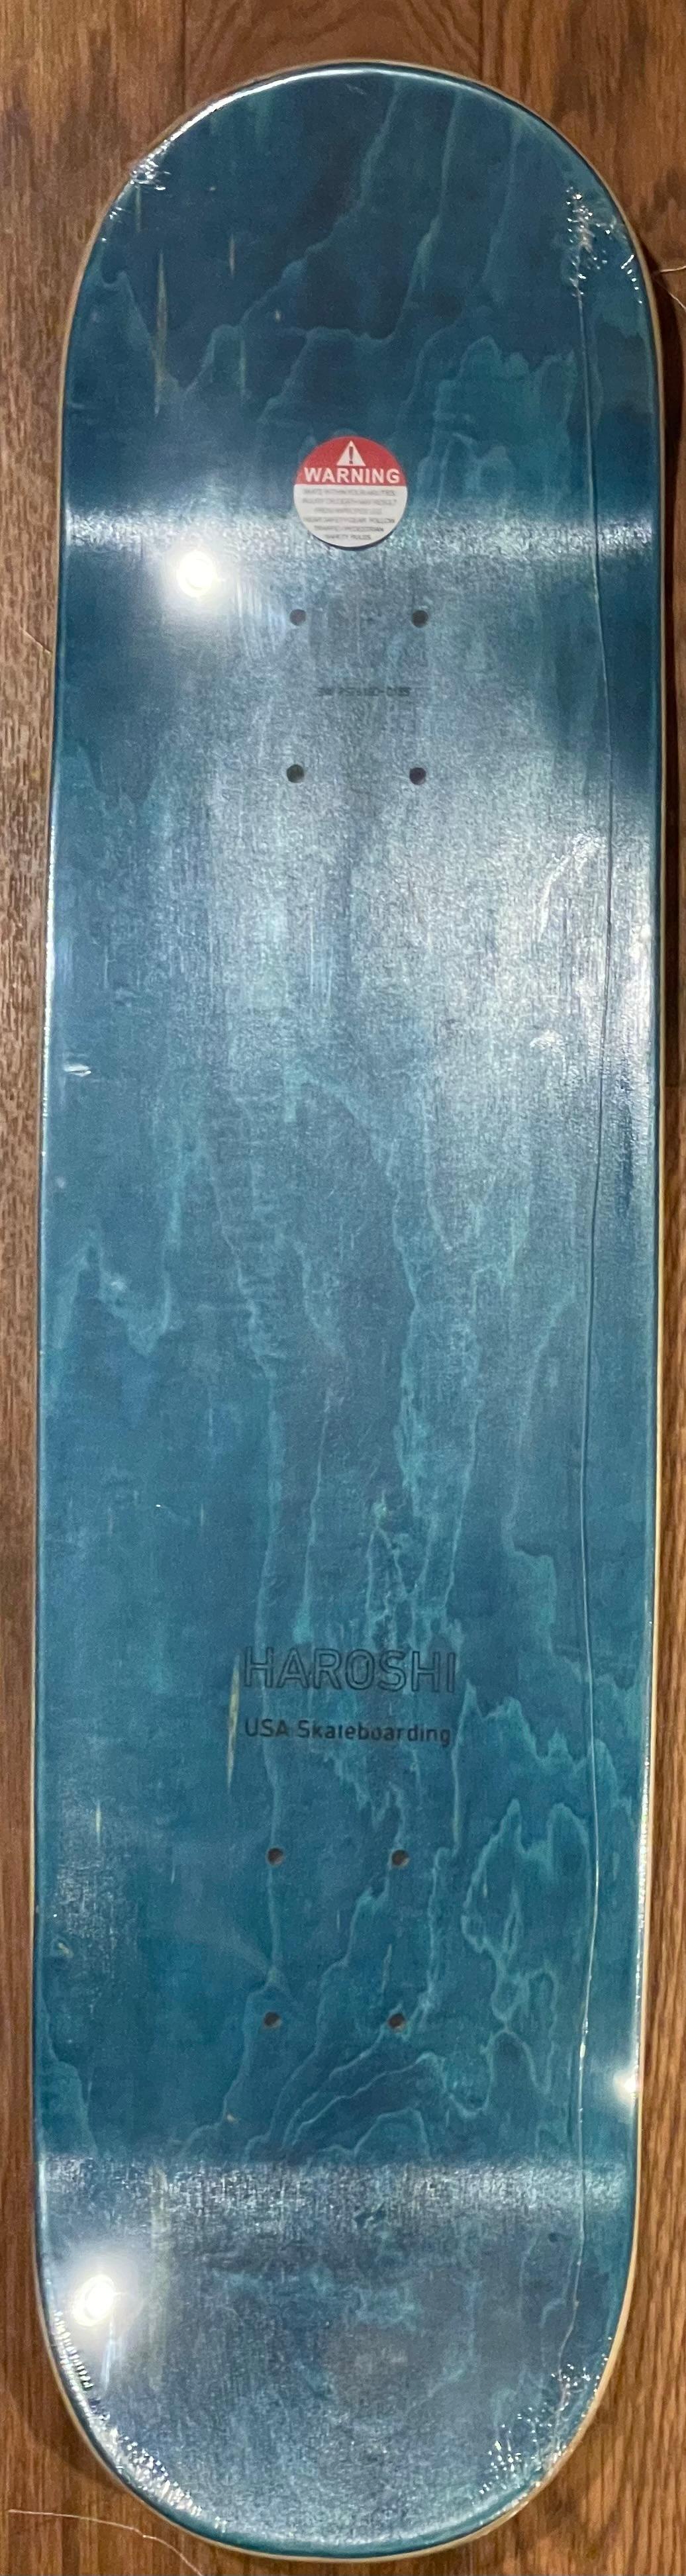 Fine Canadian Maple Wood
33 × 8 1/4 × 2 in
83.8 × 21 × 5.1 cm
Edition of 500

Teal Edition

CATEGORIES:
Silkscreen / Pop and Contemporary Pop / Cultural Commentary / Human Figure / Graffiti and Street Art
DIMENSIONS:
33 × 8 1/4 × 2 in
83.8 × 21 ×